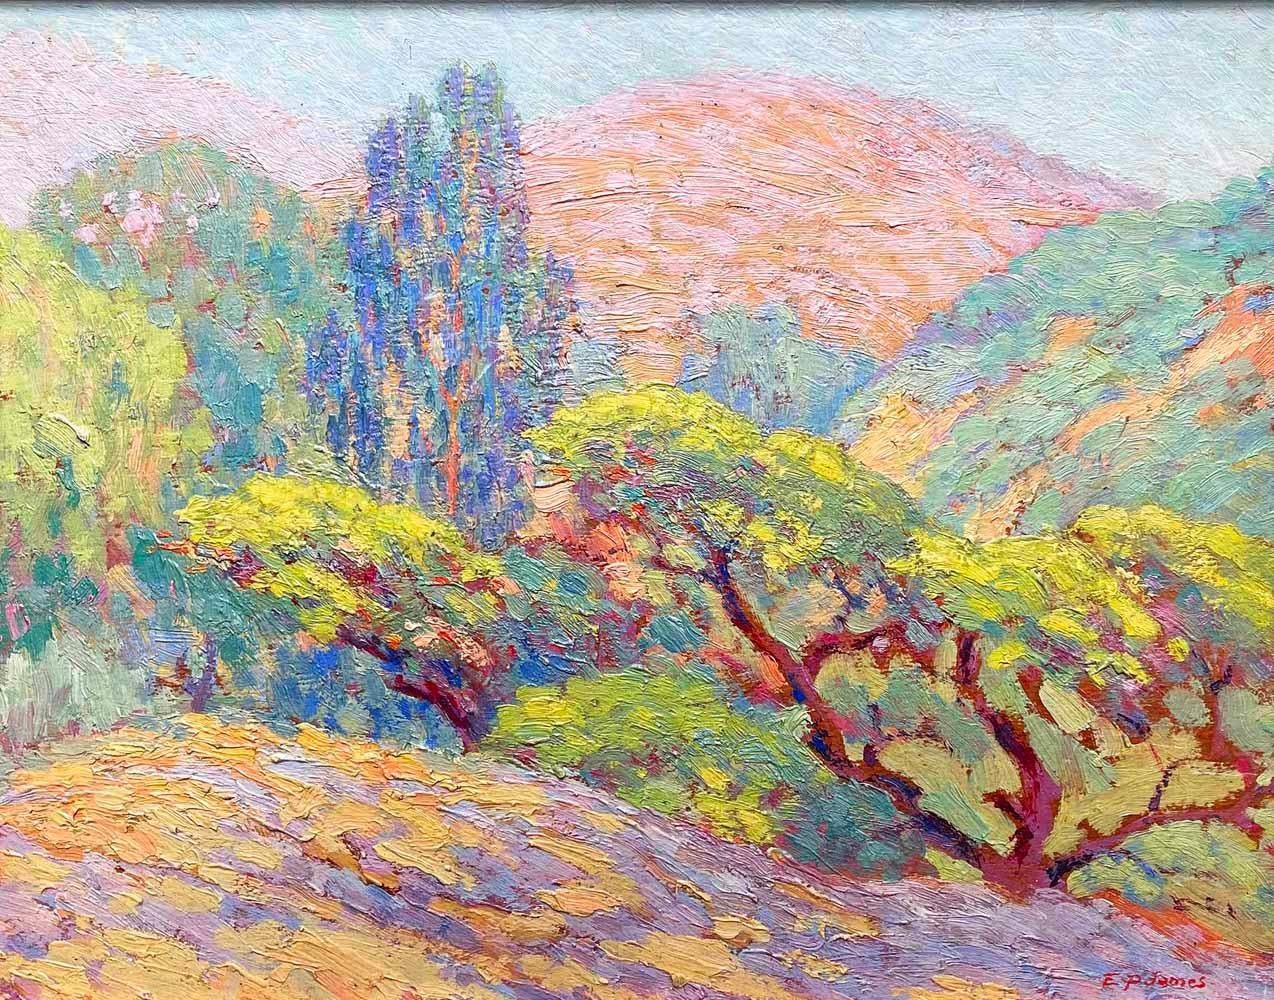 A brilliant example of California Impressionist painting, this view of the East Bay hills shimmering in pink, purple, jade and periwinkle, with scrubby trees in bonsai shapes in the foreground, was made by Edwin James Pond in the 1920s. Pond's